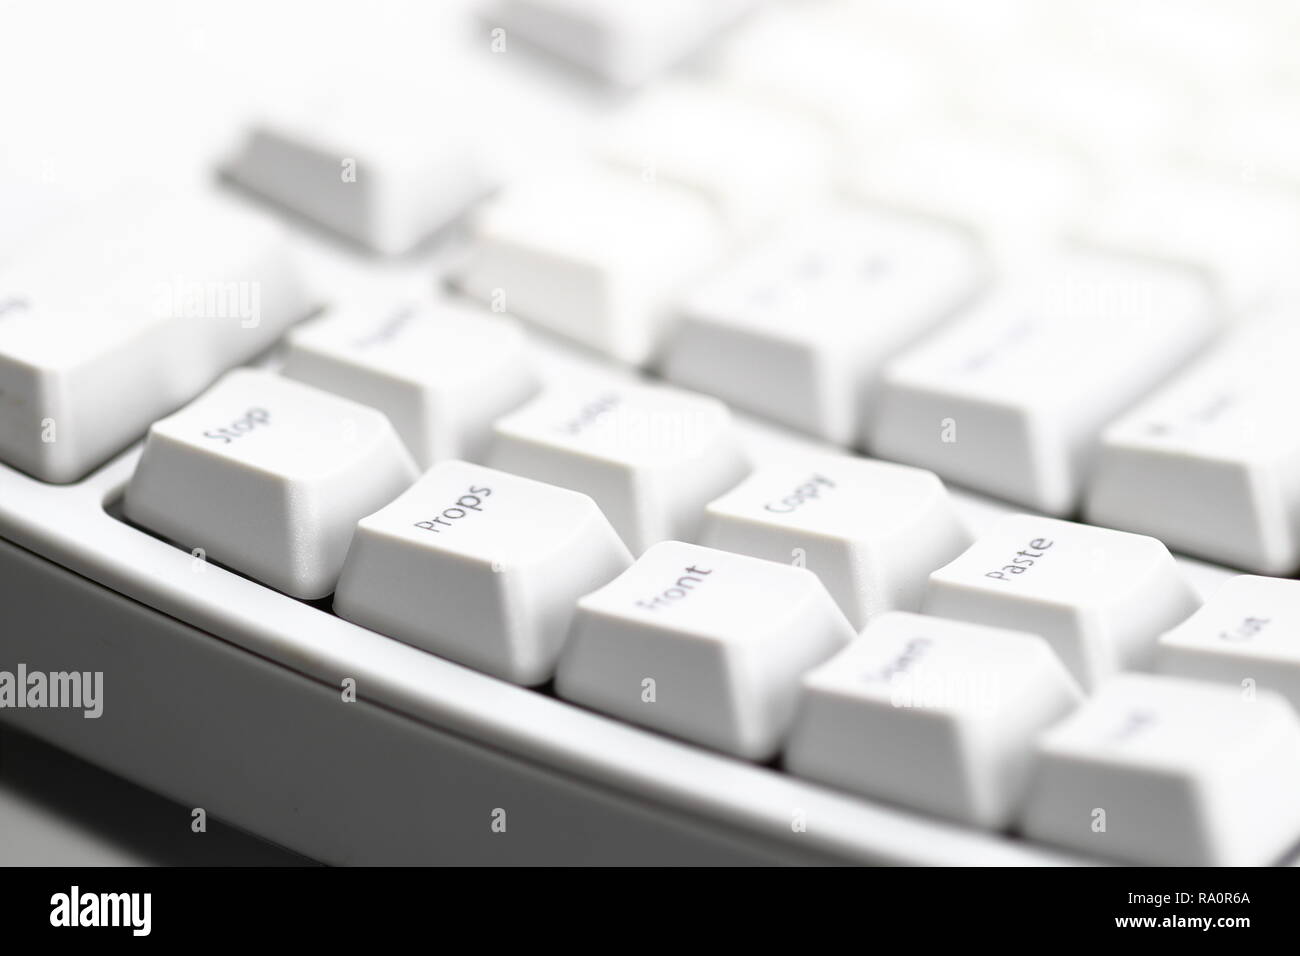 Modern computer keyboard. some part of white computer keyboard, Focus on special key 'Props'. Stock Photo